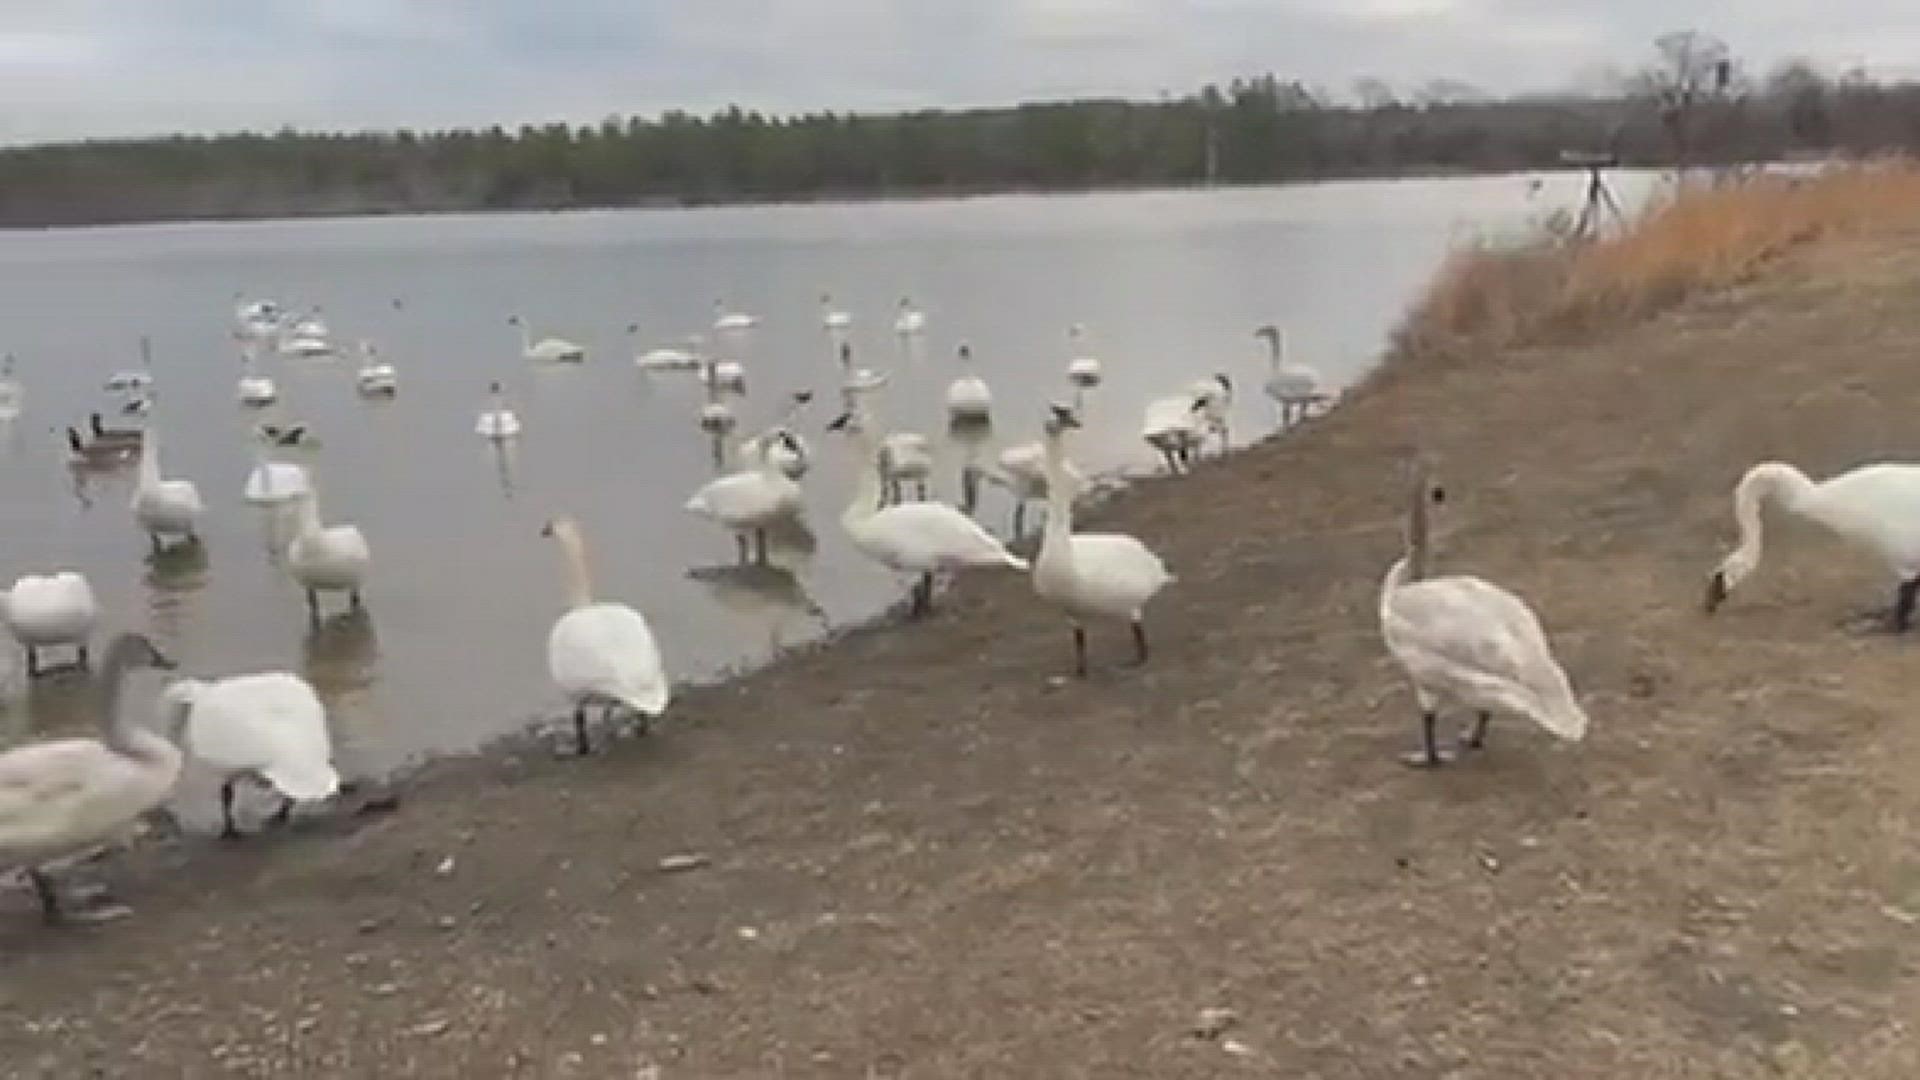 Cell phone video taken on Hiram Road in Cleburne County.  The swans will be here a couple of more weeks
Credit: Kenny Nations